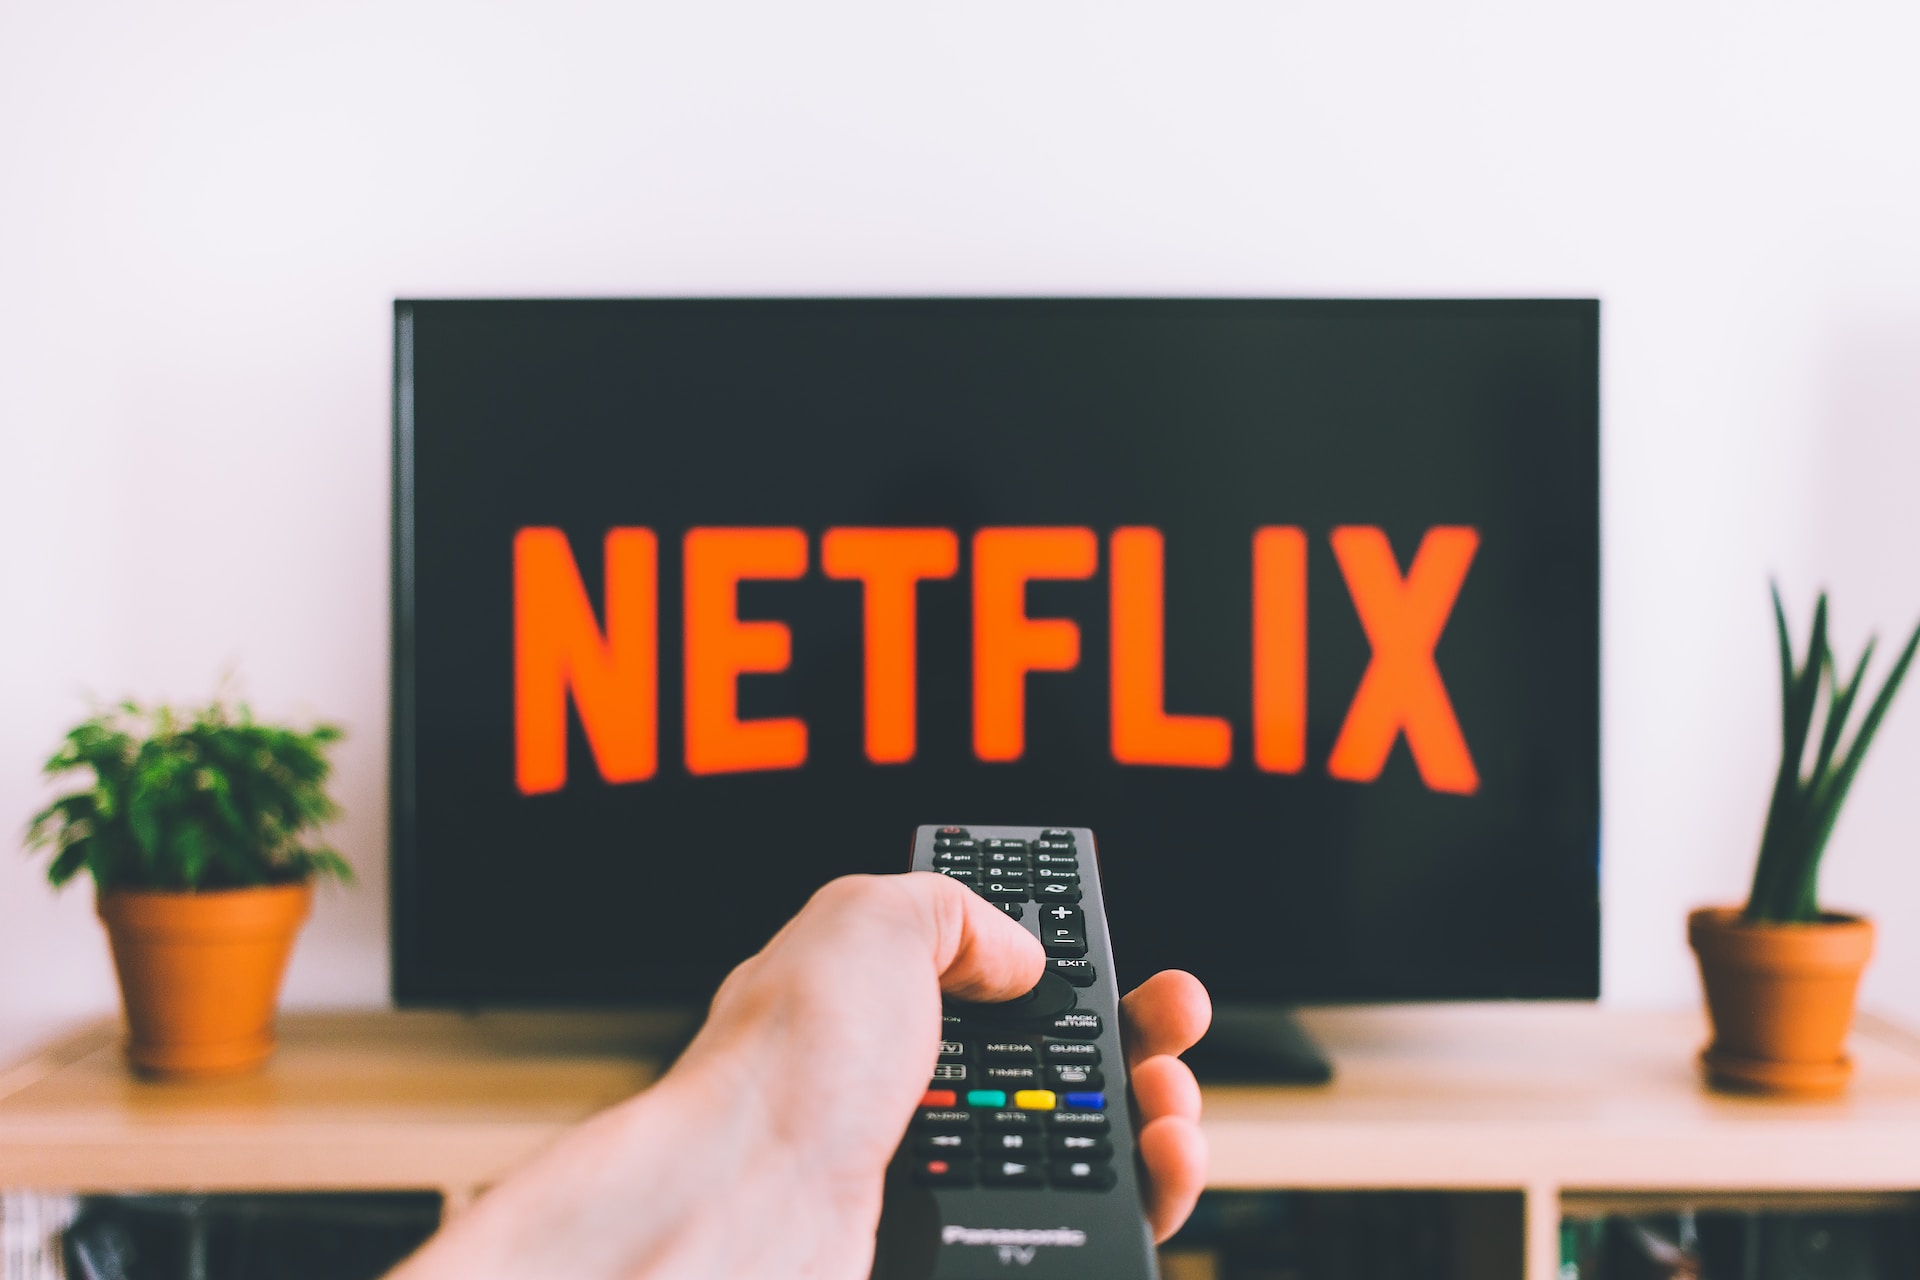 Only 1% of Netflix members are taking advantage of this free little-known perk Netflix has about 250 million customers globally, yet it turns out that nearly all of us are losing out.